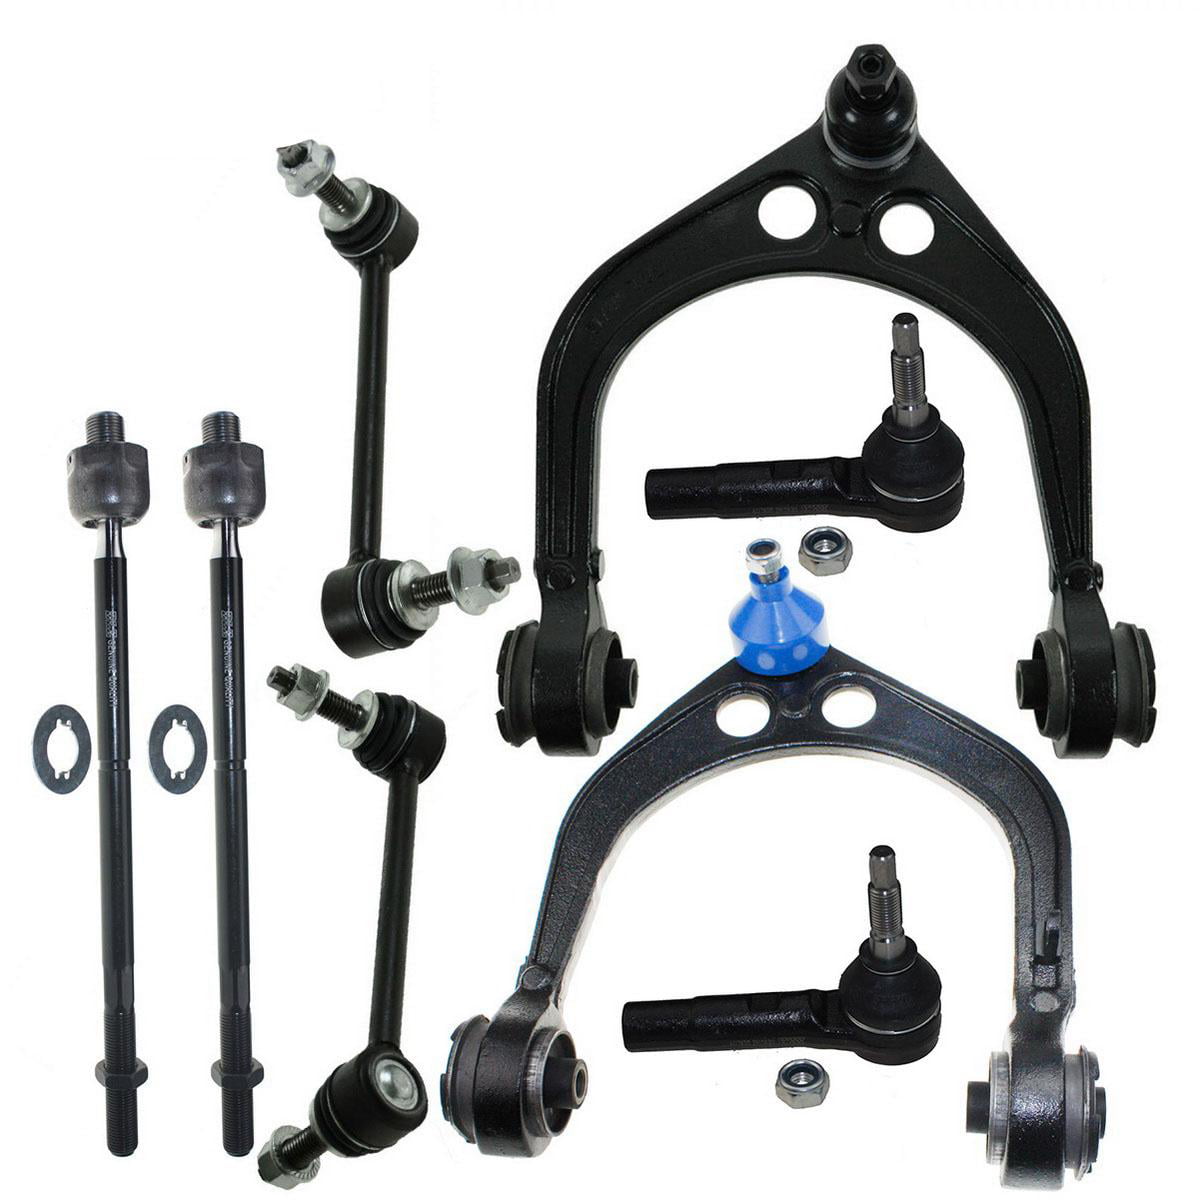 14 New Pc Suspension Kit for Buick Chevrolet Pontiac Control Arms,Tie Rod Ends 